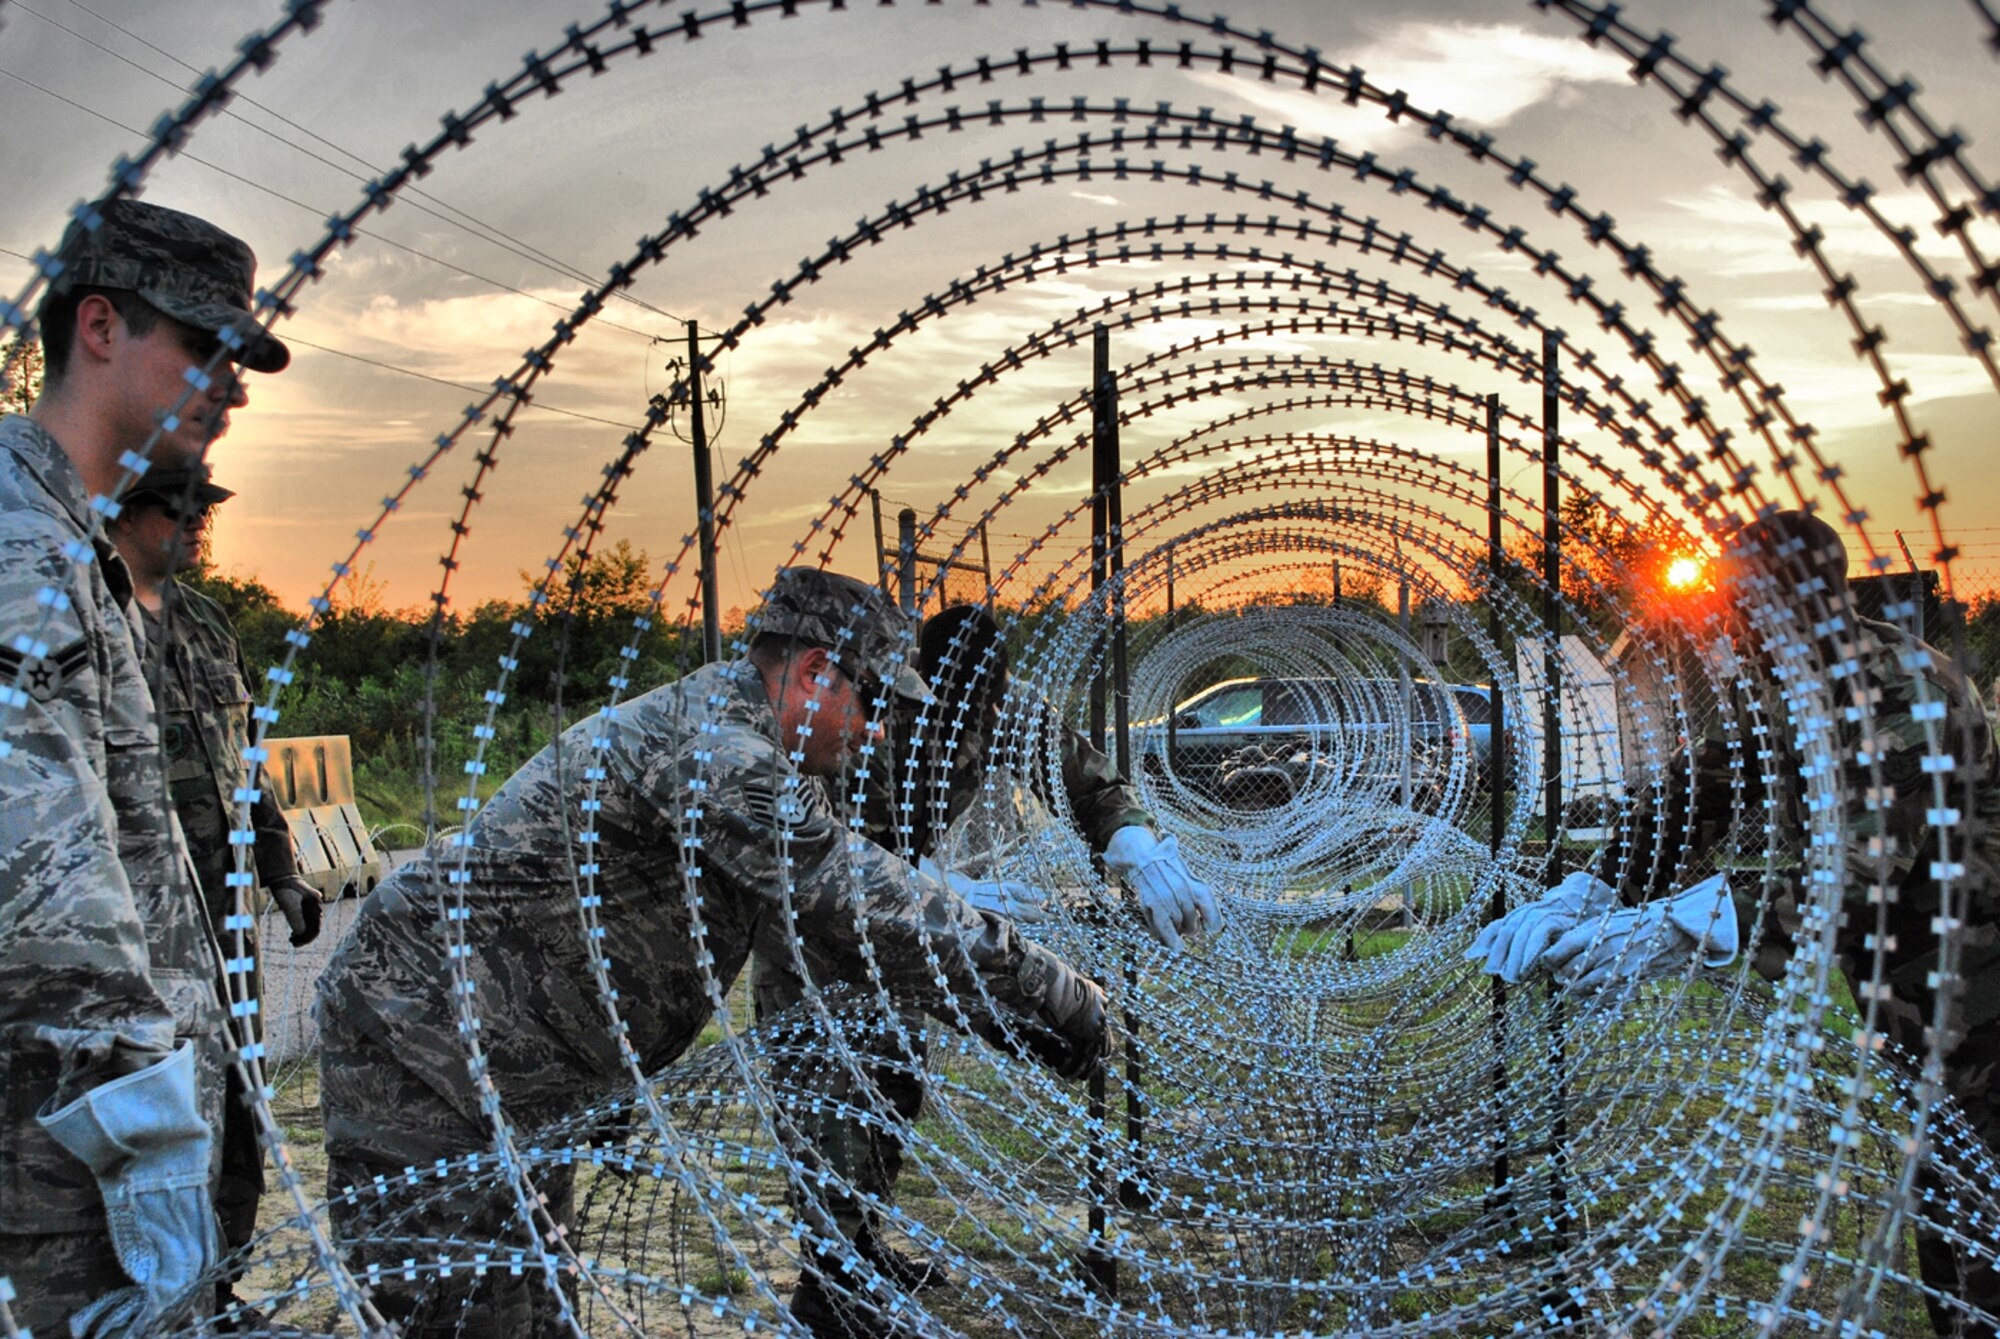 Airmen from the 621st Contingency Response Wing construct razor wire fences around their camp perimeter during a noncombatant evacuation exercise at Mackall Army Airfield, N.C., June 22-26. While the exercise scenario started peacefully in the fictional African country of Chatu, CRW Airmen set-up perimeter defenses and manned defensive fighting positions as the situation became hostile. After paratroopers from the Army's 82nd Airborne Division jumped in to provide support and escort American citizens to the airfield, CRW Airmen loaded more than 1,000 passengers and 40 short tons of cargo onto C-17 and C-130 aircraft for evacuation. (U.S. Air Force photo/Staff Sgt. Nicholas Phelps)